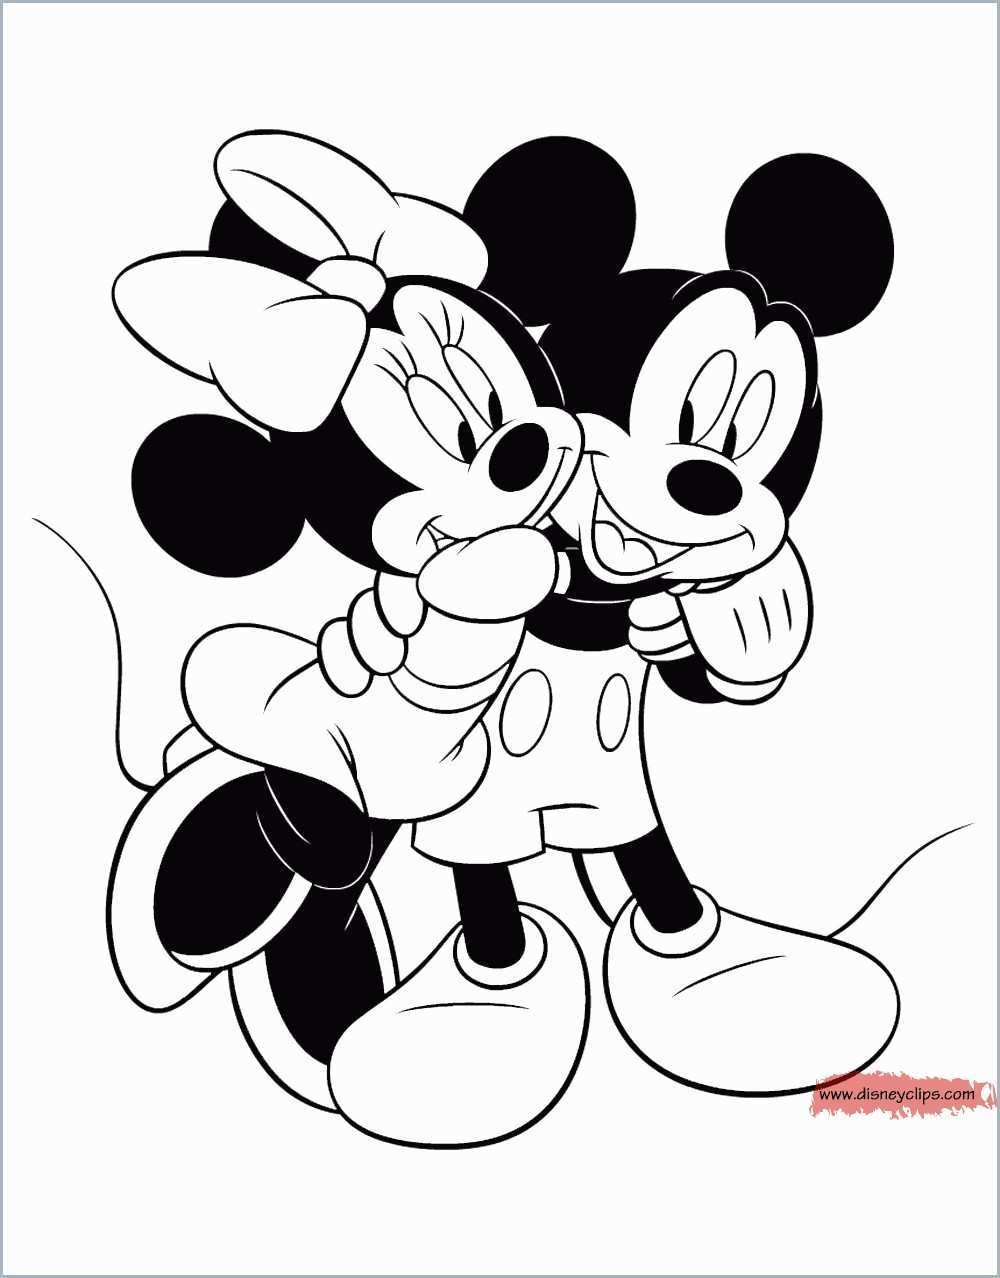 Mickey Mouse And Minnie Coloring Pages Coloring Pages Coloring Pages Mickey Mouse Pictures And Minnie